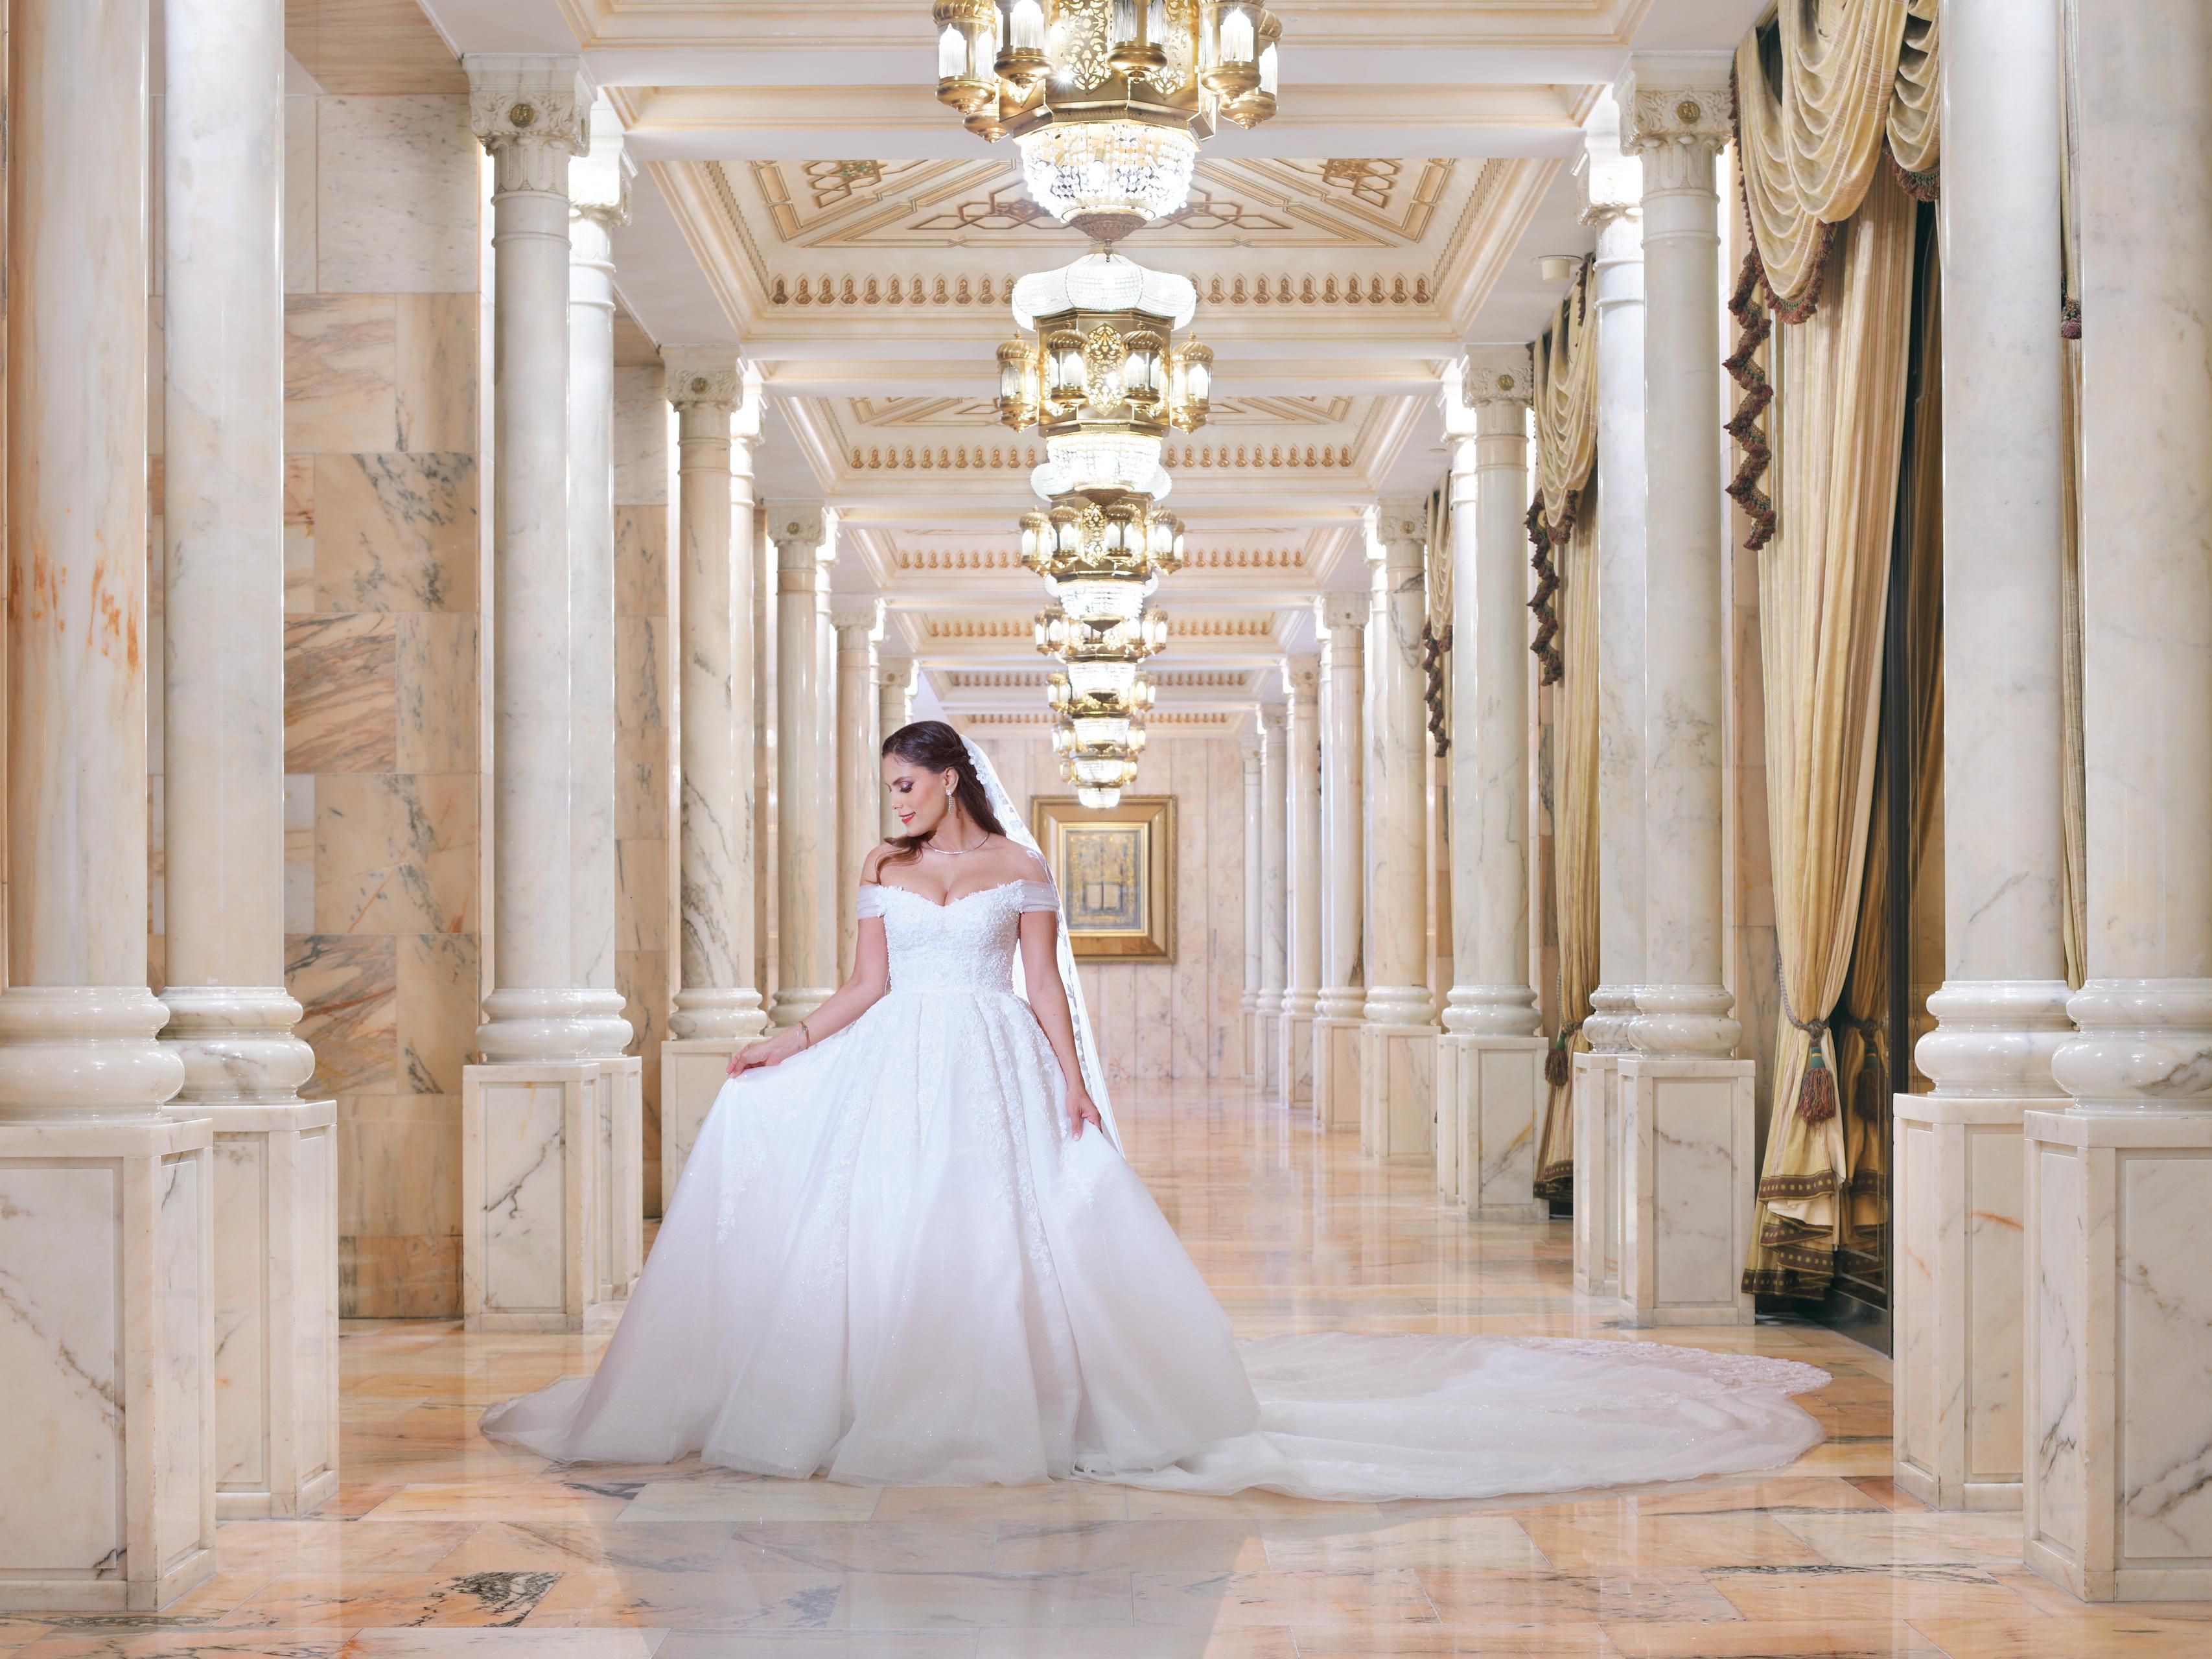 Elevate Your Wedding to Glamorous Heights